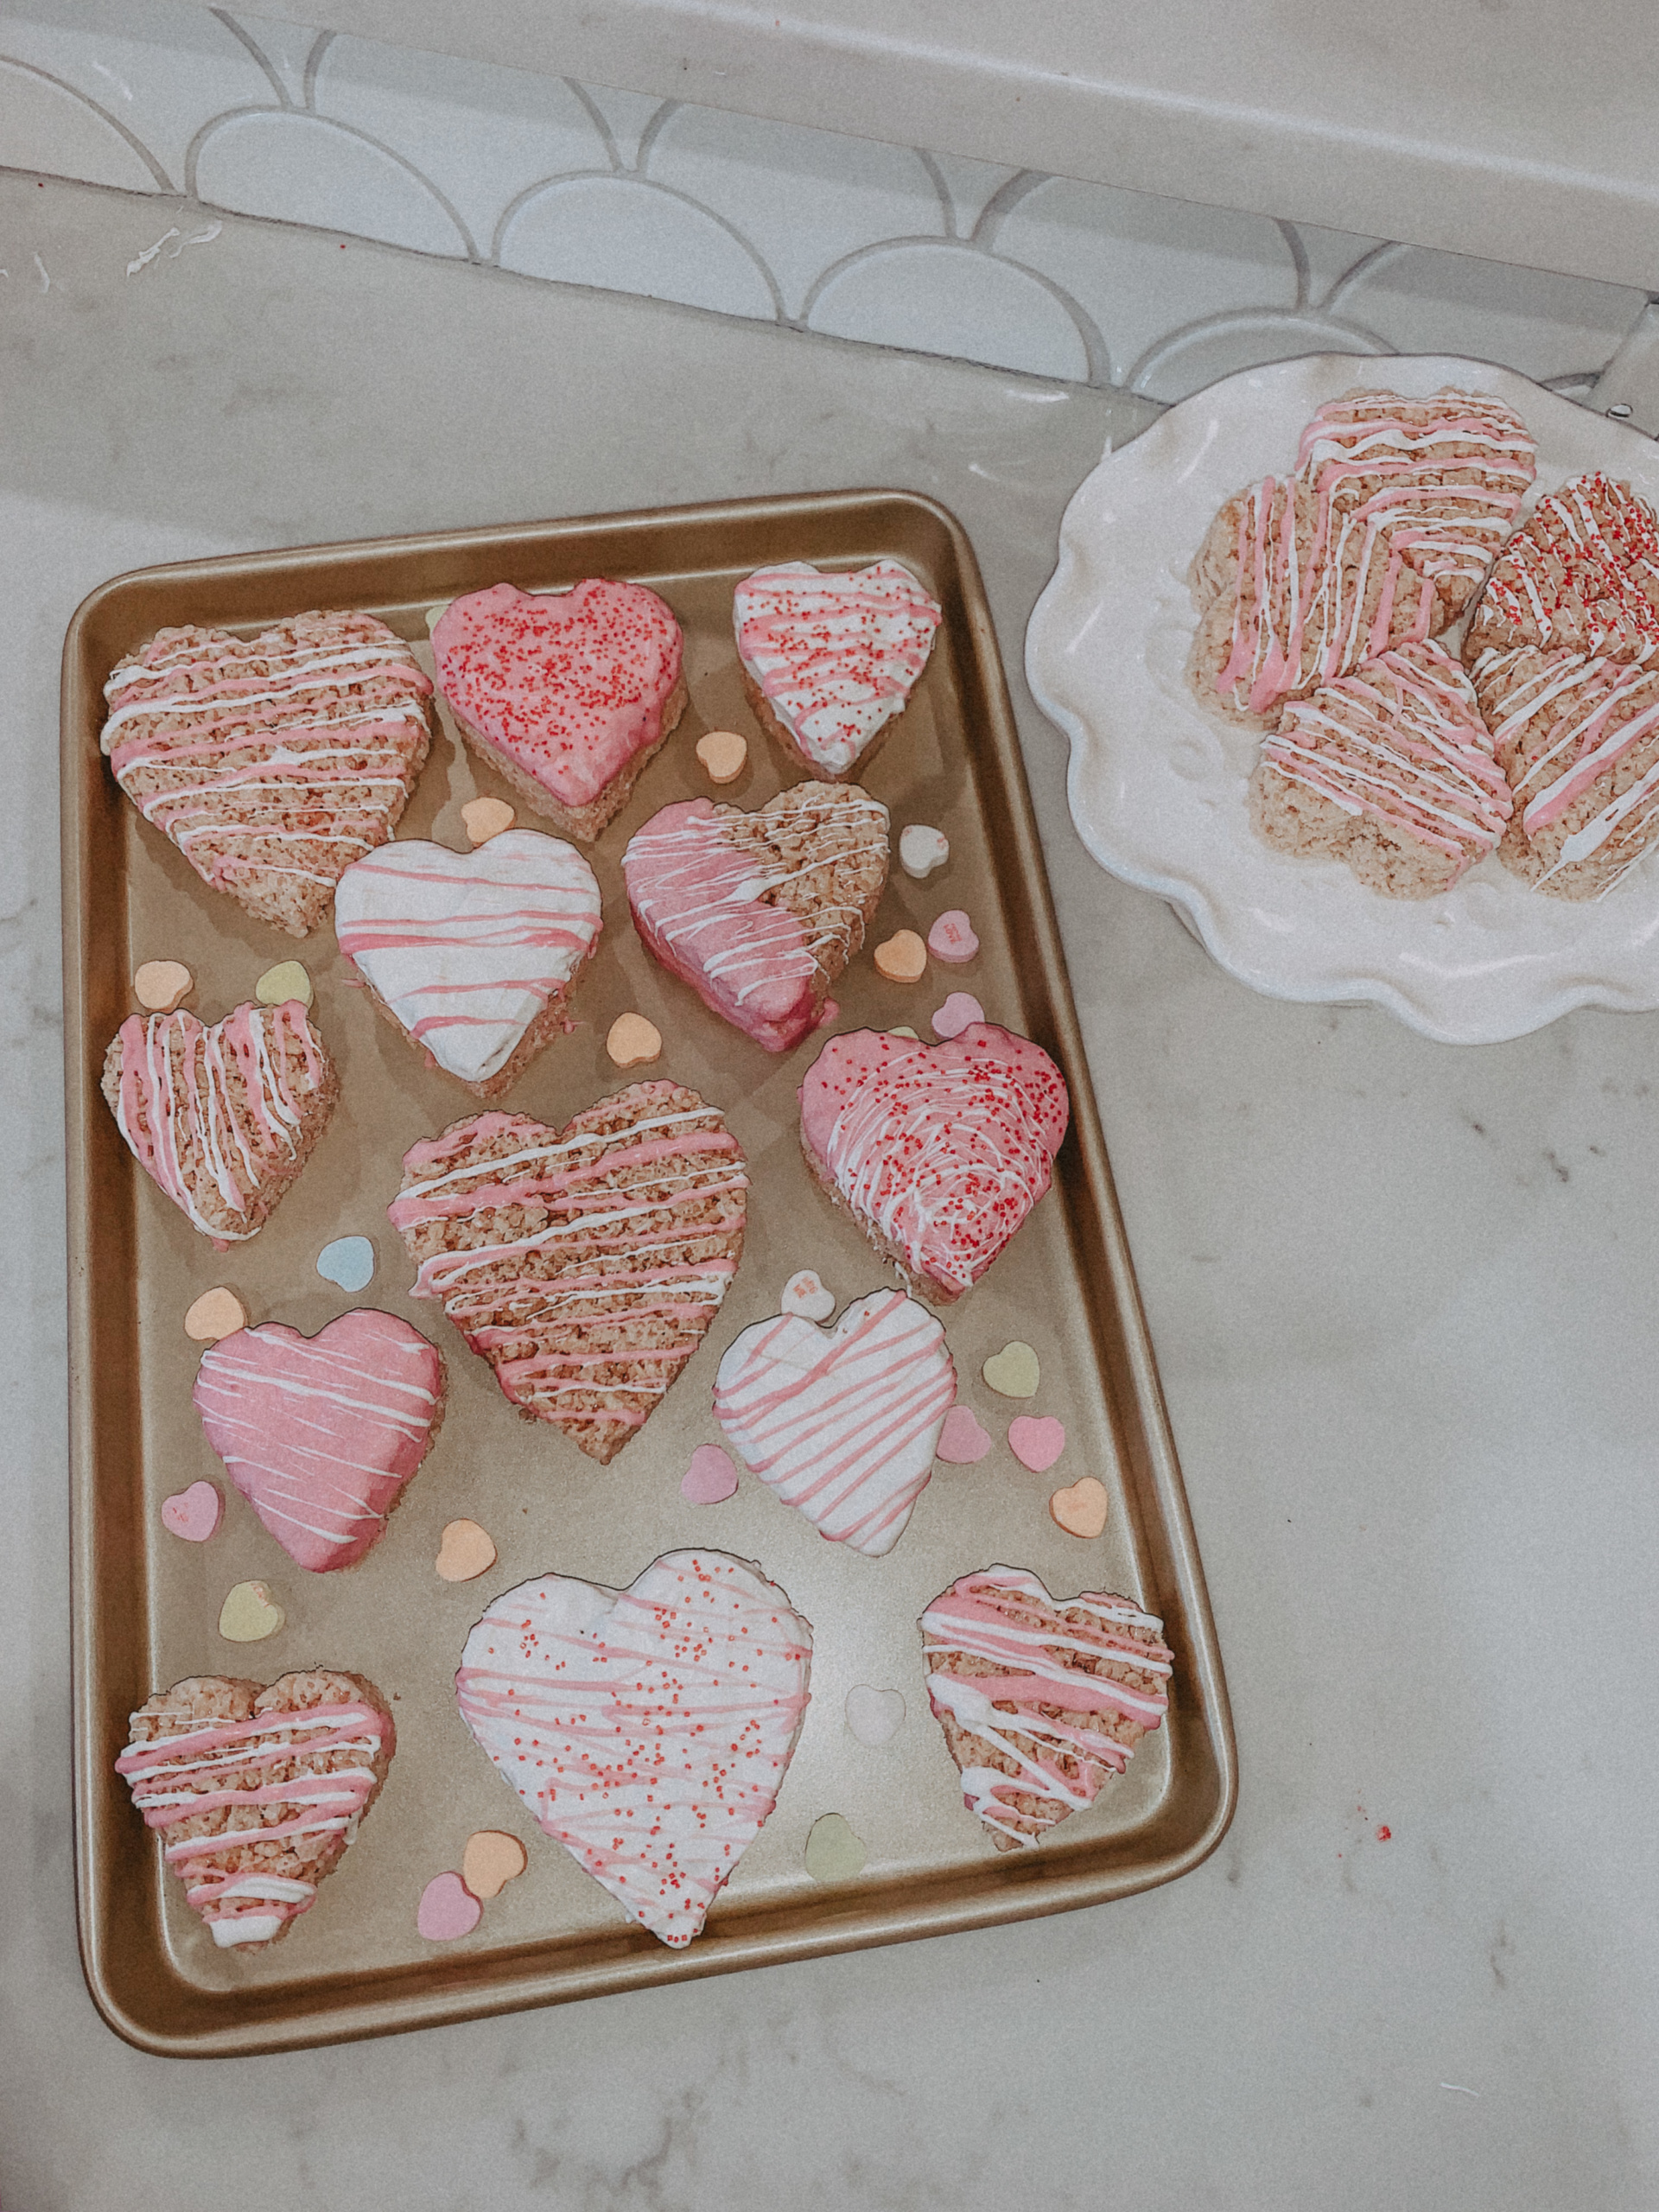 Quick and Easy Valentine's Day Treats for Everyone! - Pink Rice Crispy's - Heart Shaped Rice Crispy's - Marble Countertops - Simply by Simone - Simone Piliero - Galentines Day - YouTube - Vlog - Recipe #recipe #valentinesday #galentinesday #ricecrispy #ricecrispies #valentinesdaytreats #valentinesdayrecipe 